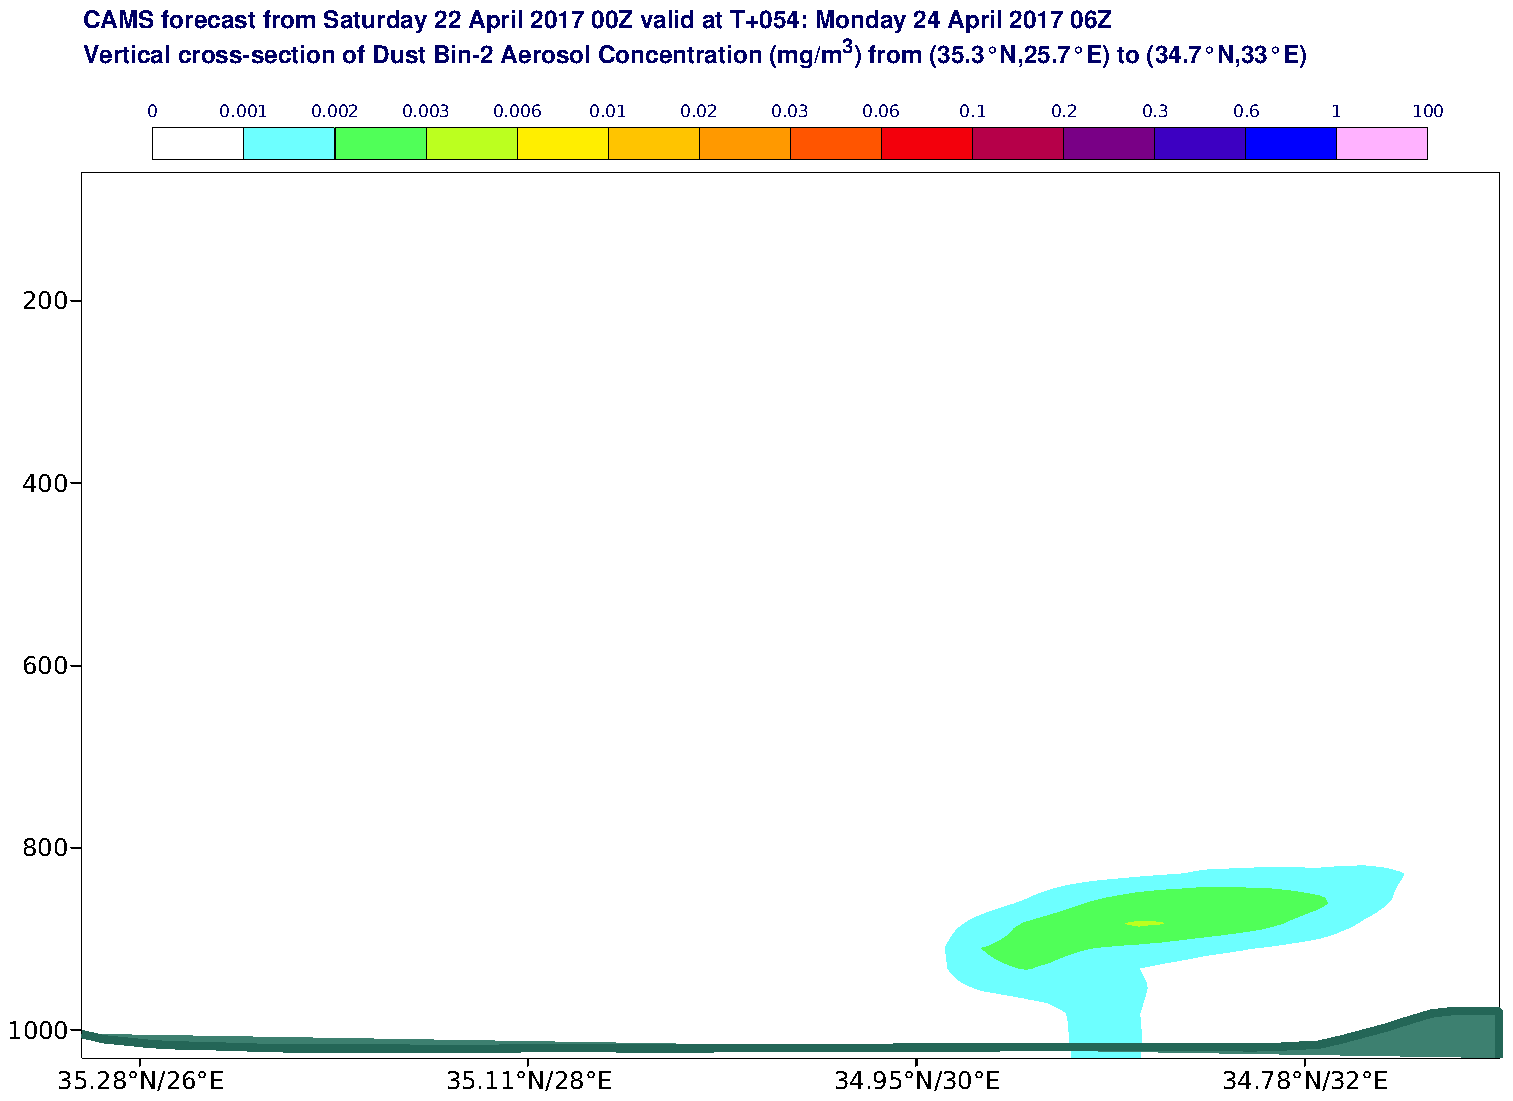 Vertical cross-section of Dust Bin-2 Aerosol Concentration (mg/m3) valid at T54 - 2017-04-24 06:00